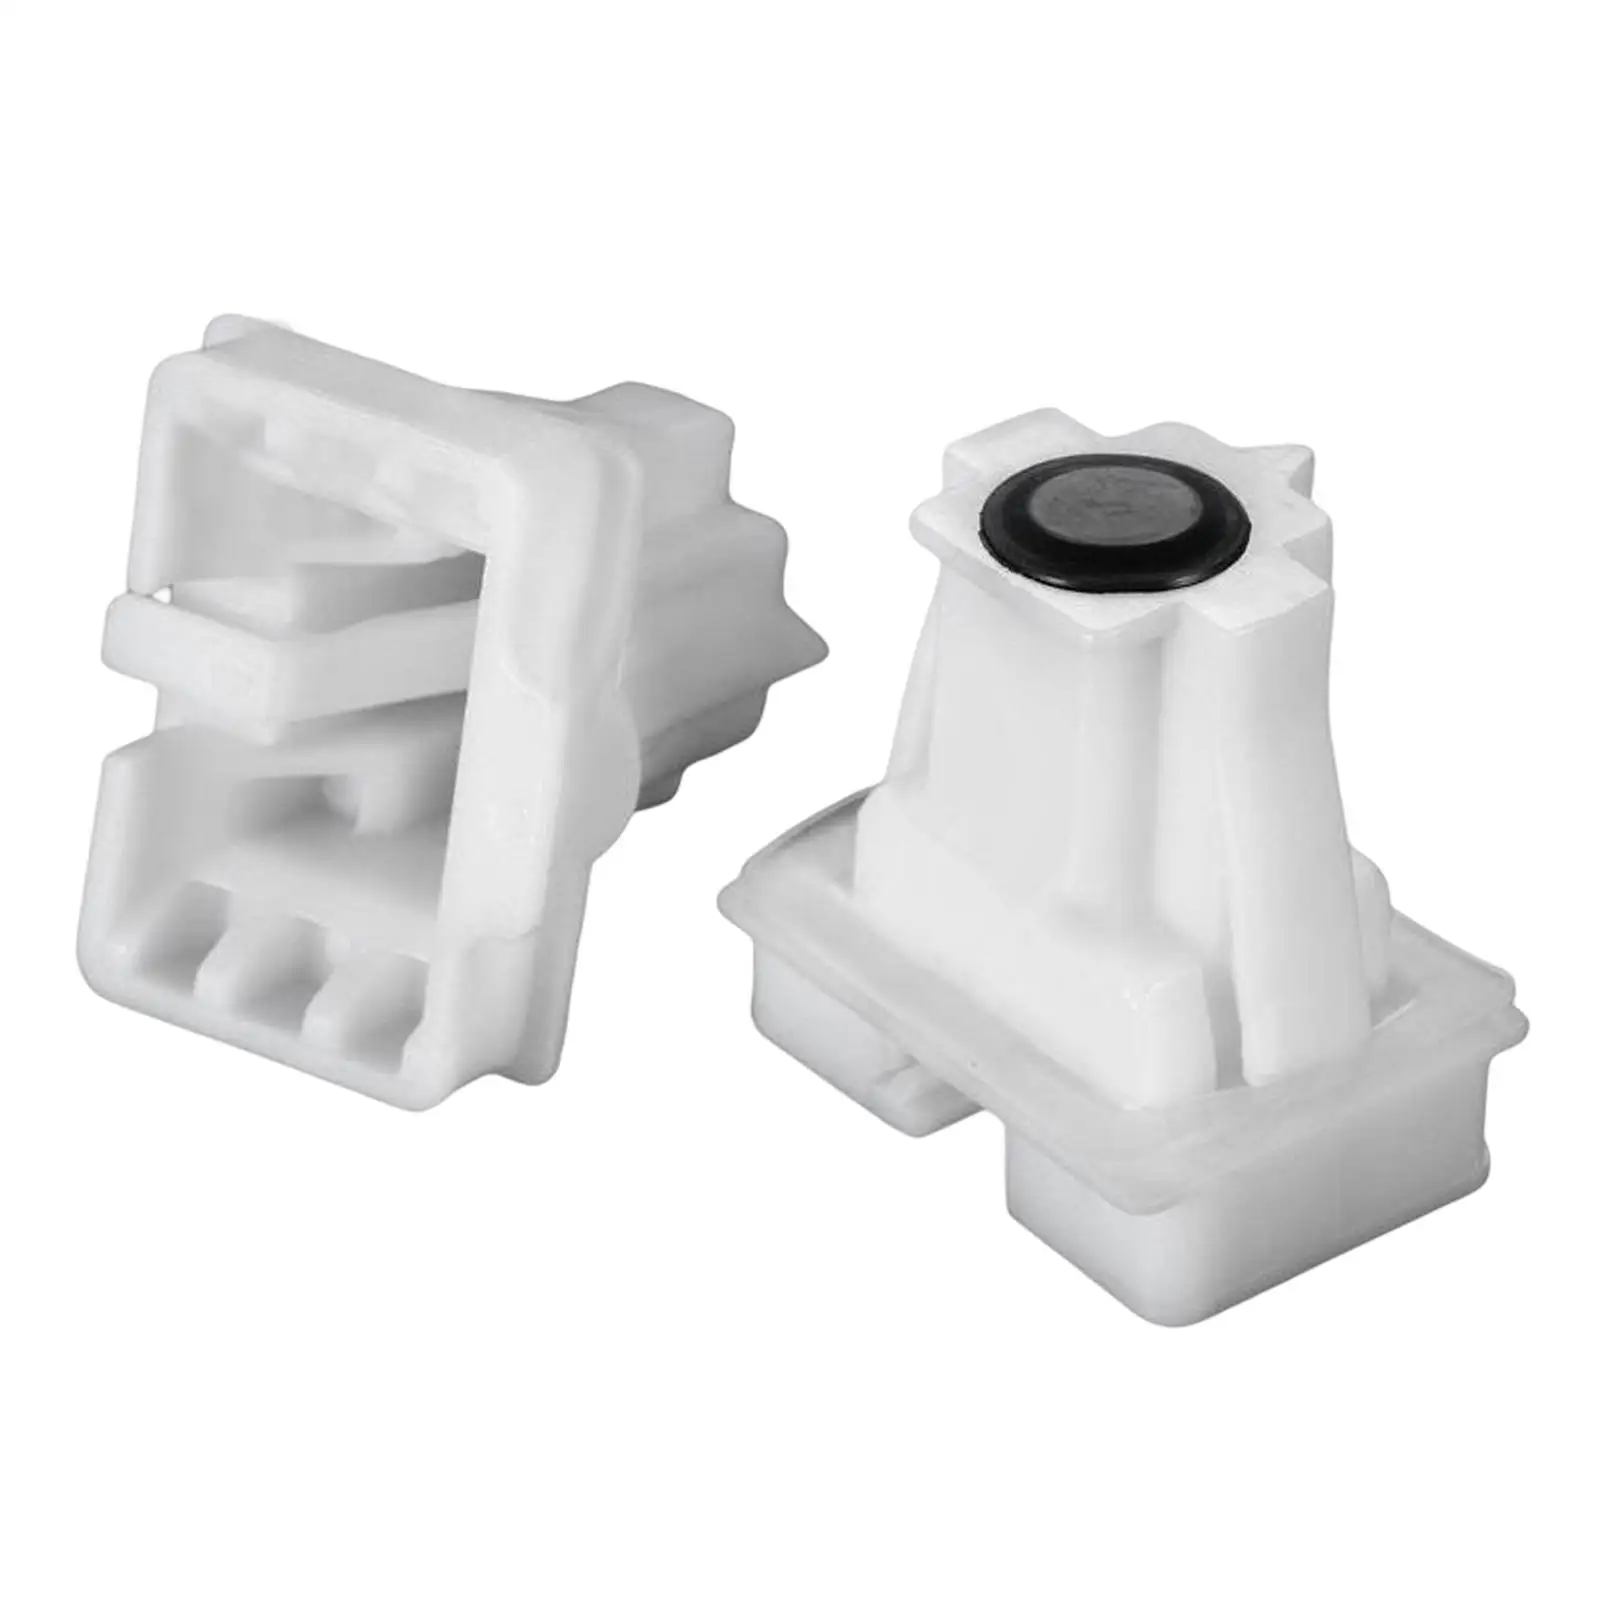 2 Pieces Rear Seat Cushion Pad Clips 1609267180 White C4 Durable